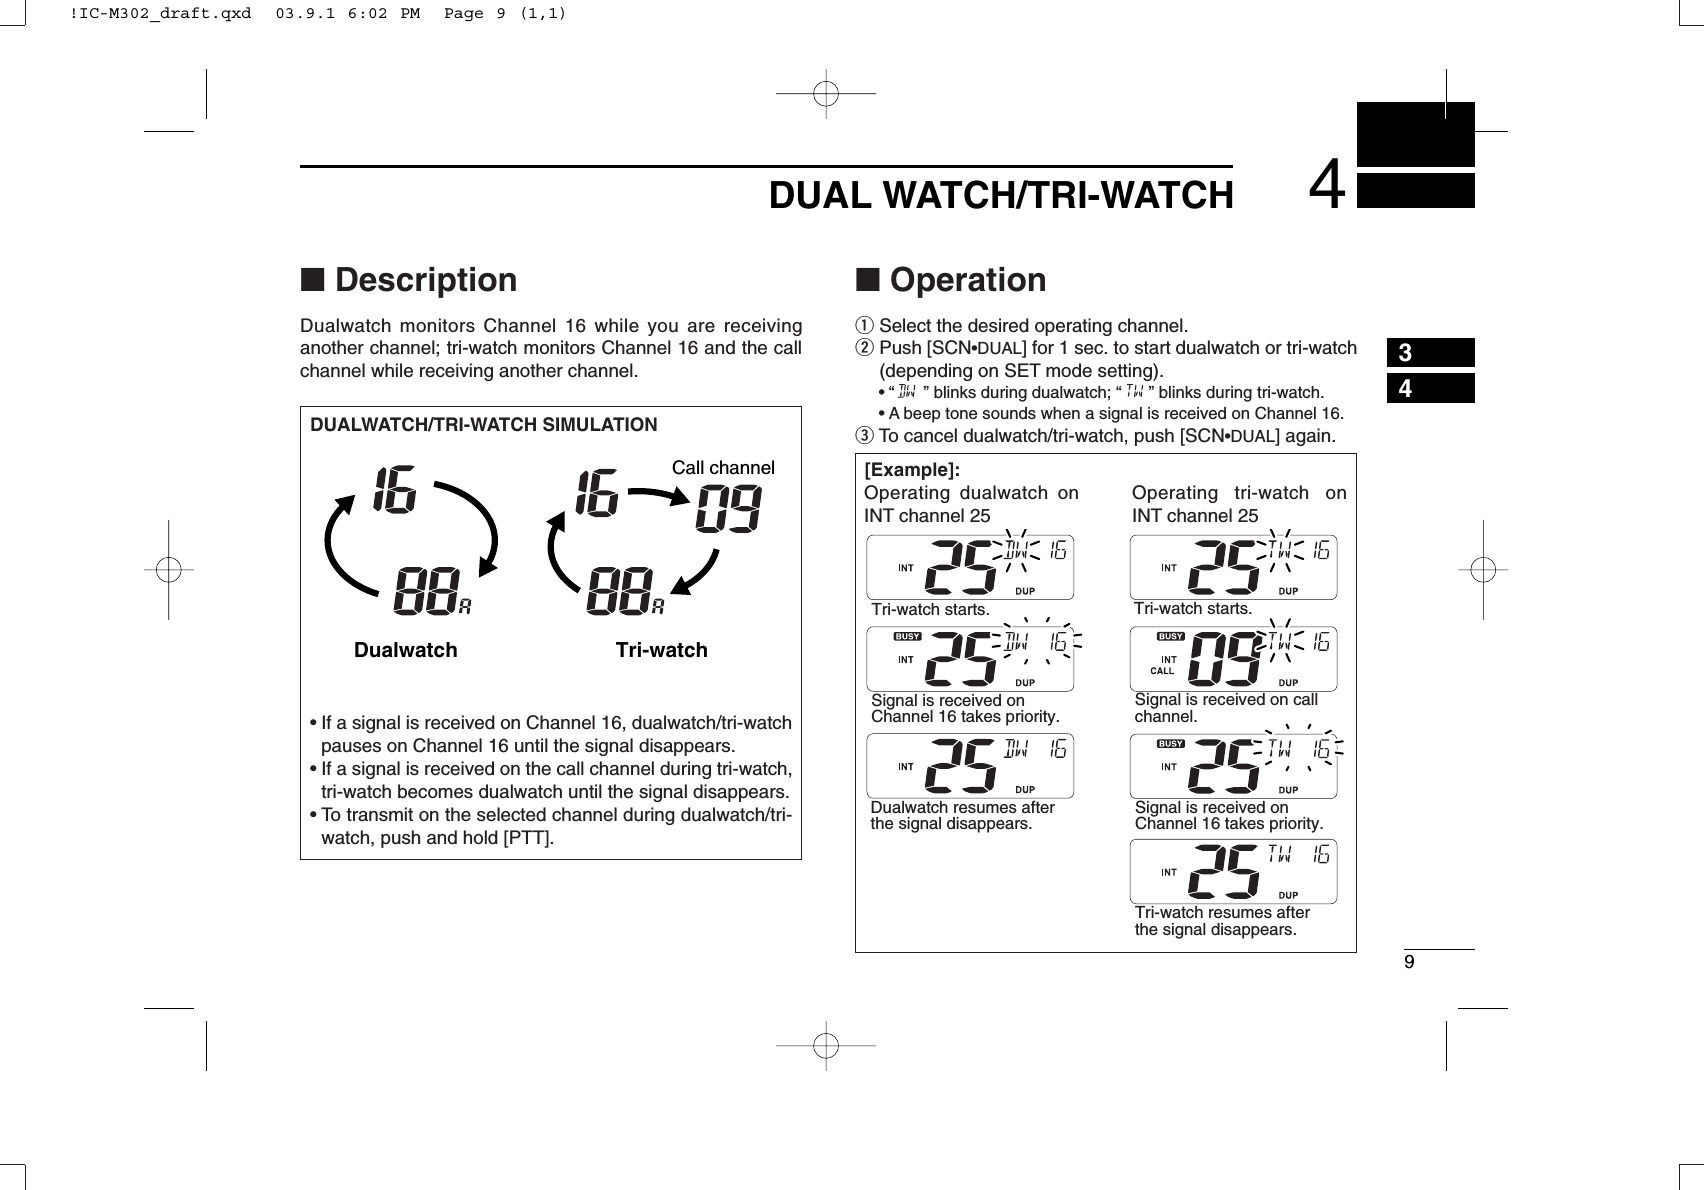 94DUAL WATCH/TRI-WATCH34■DescriptionDualwatch monitors Channel 16 while you are receiving another channel; tri-watch monitors Channel 16 and the callchannel while receiving another channel.■OperationqSelect the desired operating channel.wPush [SCN•DUAL] for 1 sec. to start dualwatch or tri-watch(depending on SET mode setting).•“ ” blinks during dualwatch; “” blinks during tri-watch.•A beep tone sounds when a signal is received on Channel 16.eTo cancel dualwatch/tri-watch, push [SCN•DUAL] again.DUALWATCH/TRI-WATCH SIMULATION•If a signal is received on Channel 16, dualwatch/tri-watchpauses on Channel 16 until the signal disappears.•If a signal is received on the call channel during tri-watch,tri-watch becomes dualwatch until the signal disappears.•To transmit on the selected channel during dualwatch/tri-watch, push and hold [PTT].Dualwatch Tri-watchCall channel[Example]:Tri-watch starts. Tri-watch starts.Signal is received on Channel 16 takes priority.Signal is received on call channel.Dualwatch resumes after the signal disappears.Signal is received on Channel 16 takes priority.Tri-watch resumes after the signal disappears.Operating dualwatch onINT channel 25Operating tri-watch onINT channel 25!IC-M302_draft.qxd  03.9.1 6:02 PM  Page 9 (1,1)